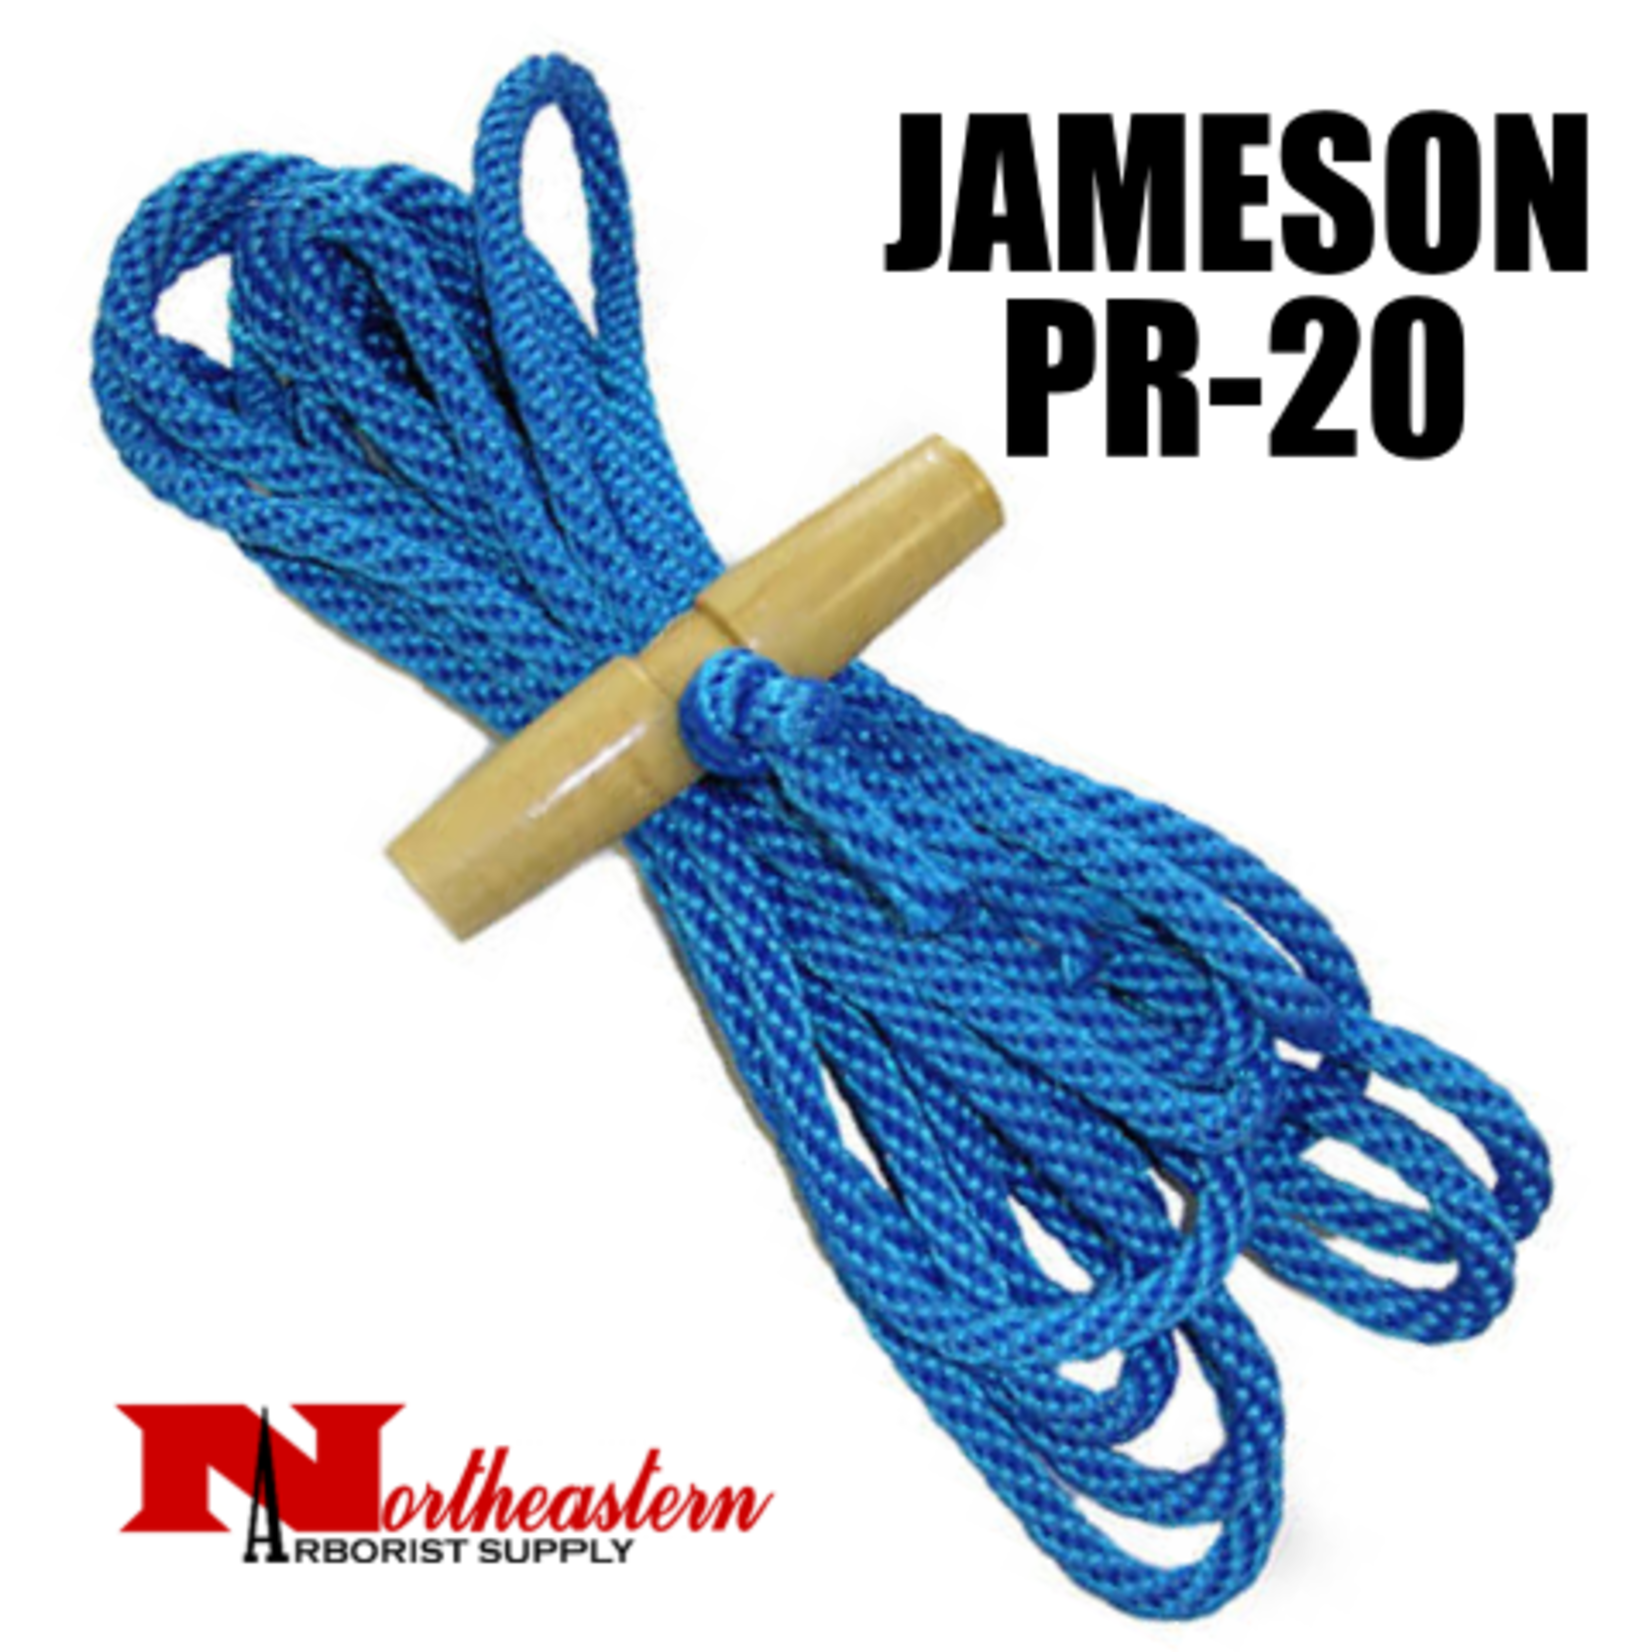 Jameson 5/16 x 20 Polyester Rope with Wooden Handle (81-PR-20)